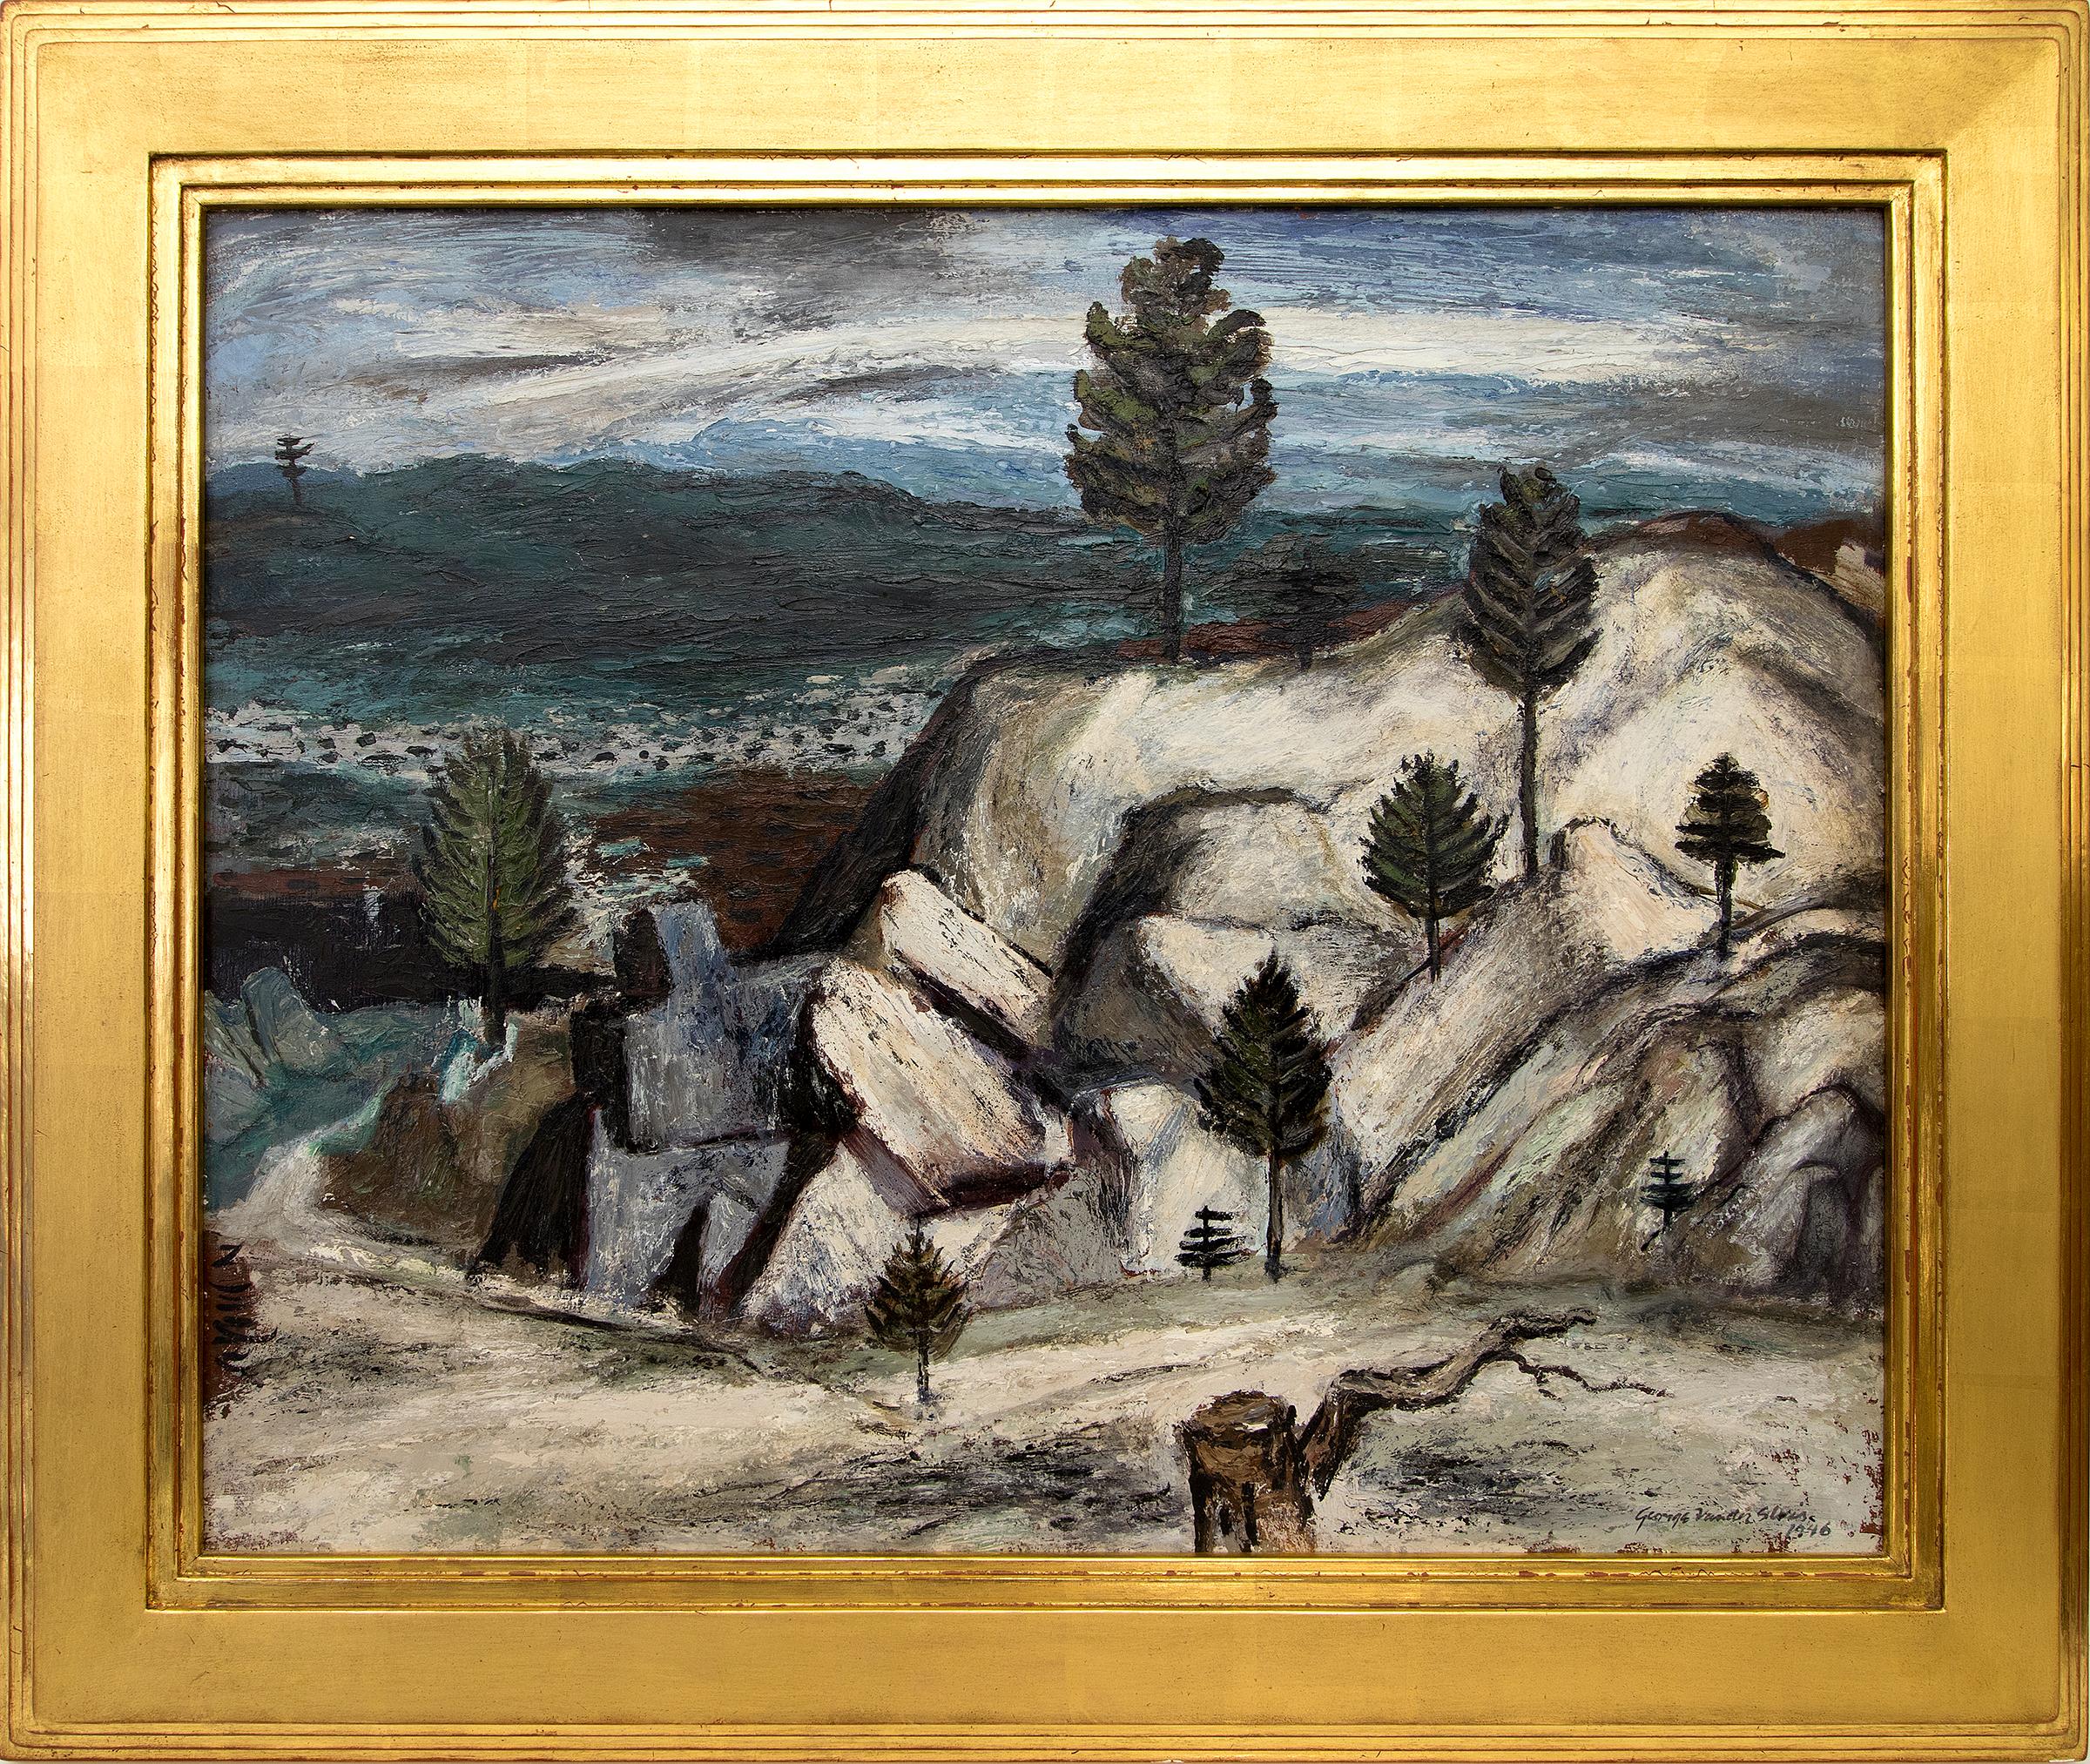 George Vander Sluis Landscape Painting - Colorado Winter Landscape Oil Painting of Rocks and Trees Over Valley with Snow